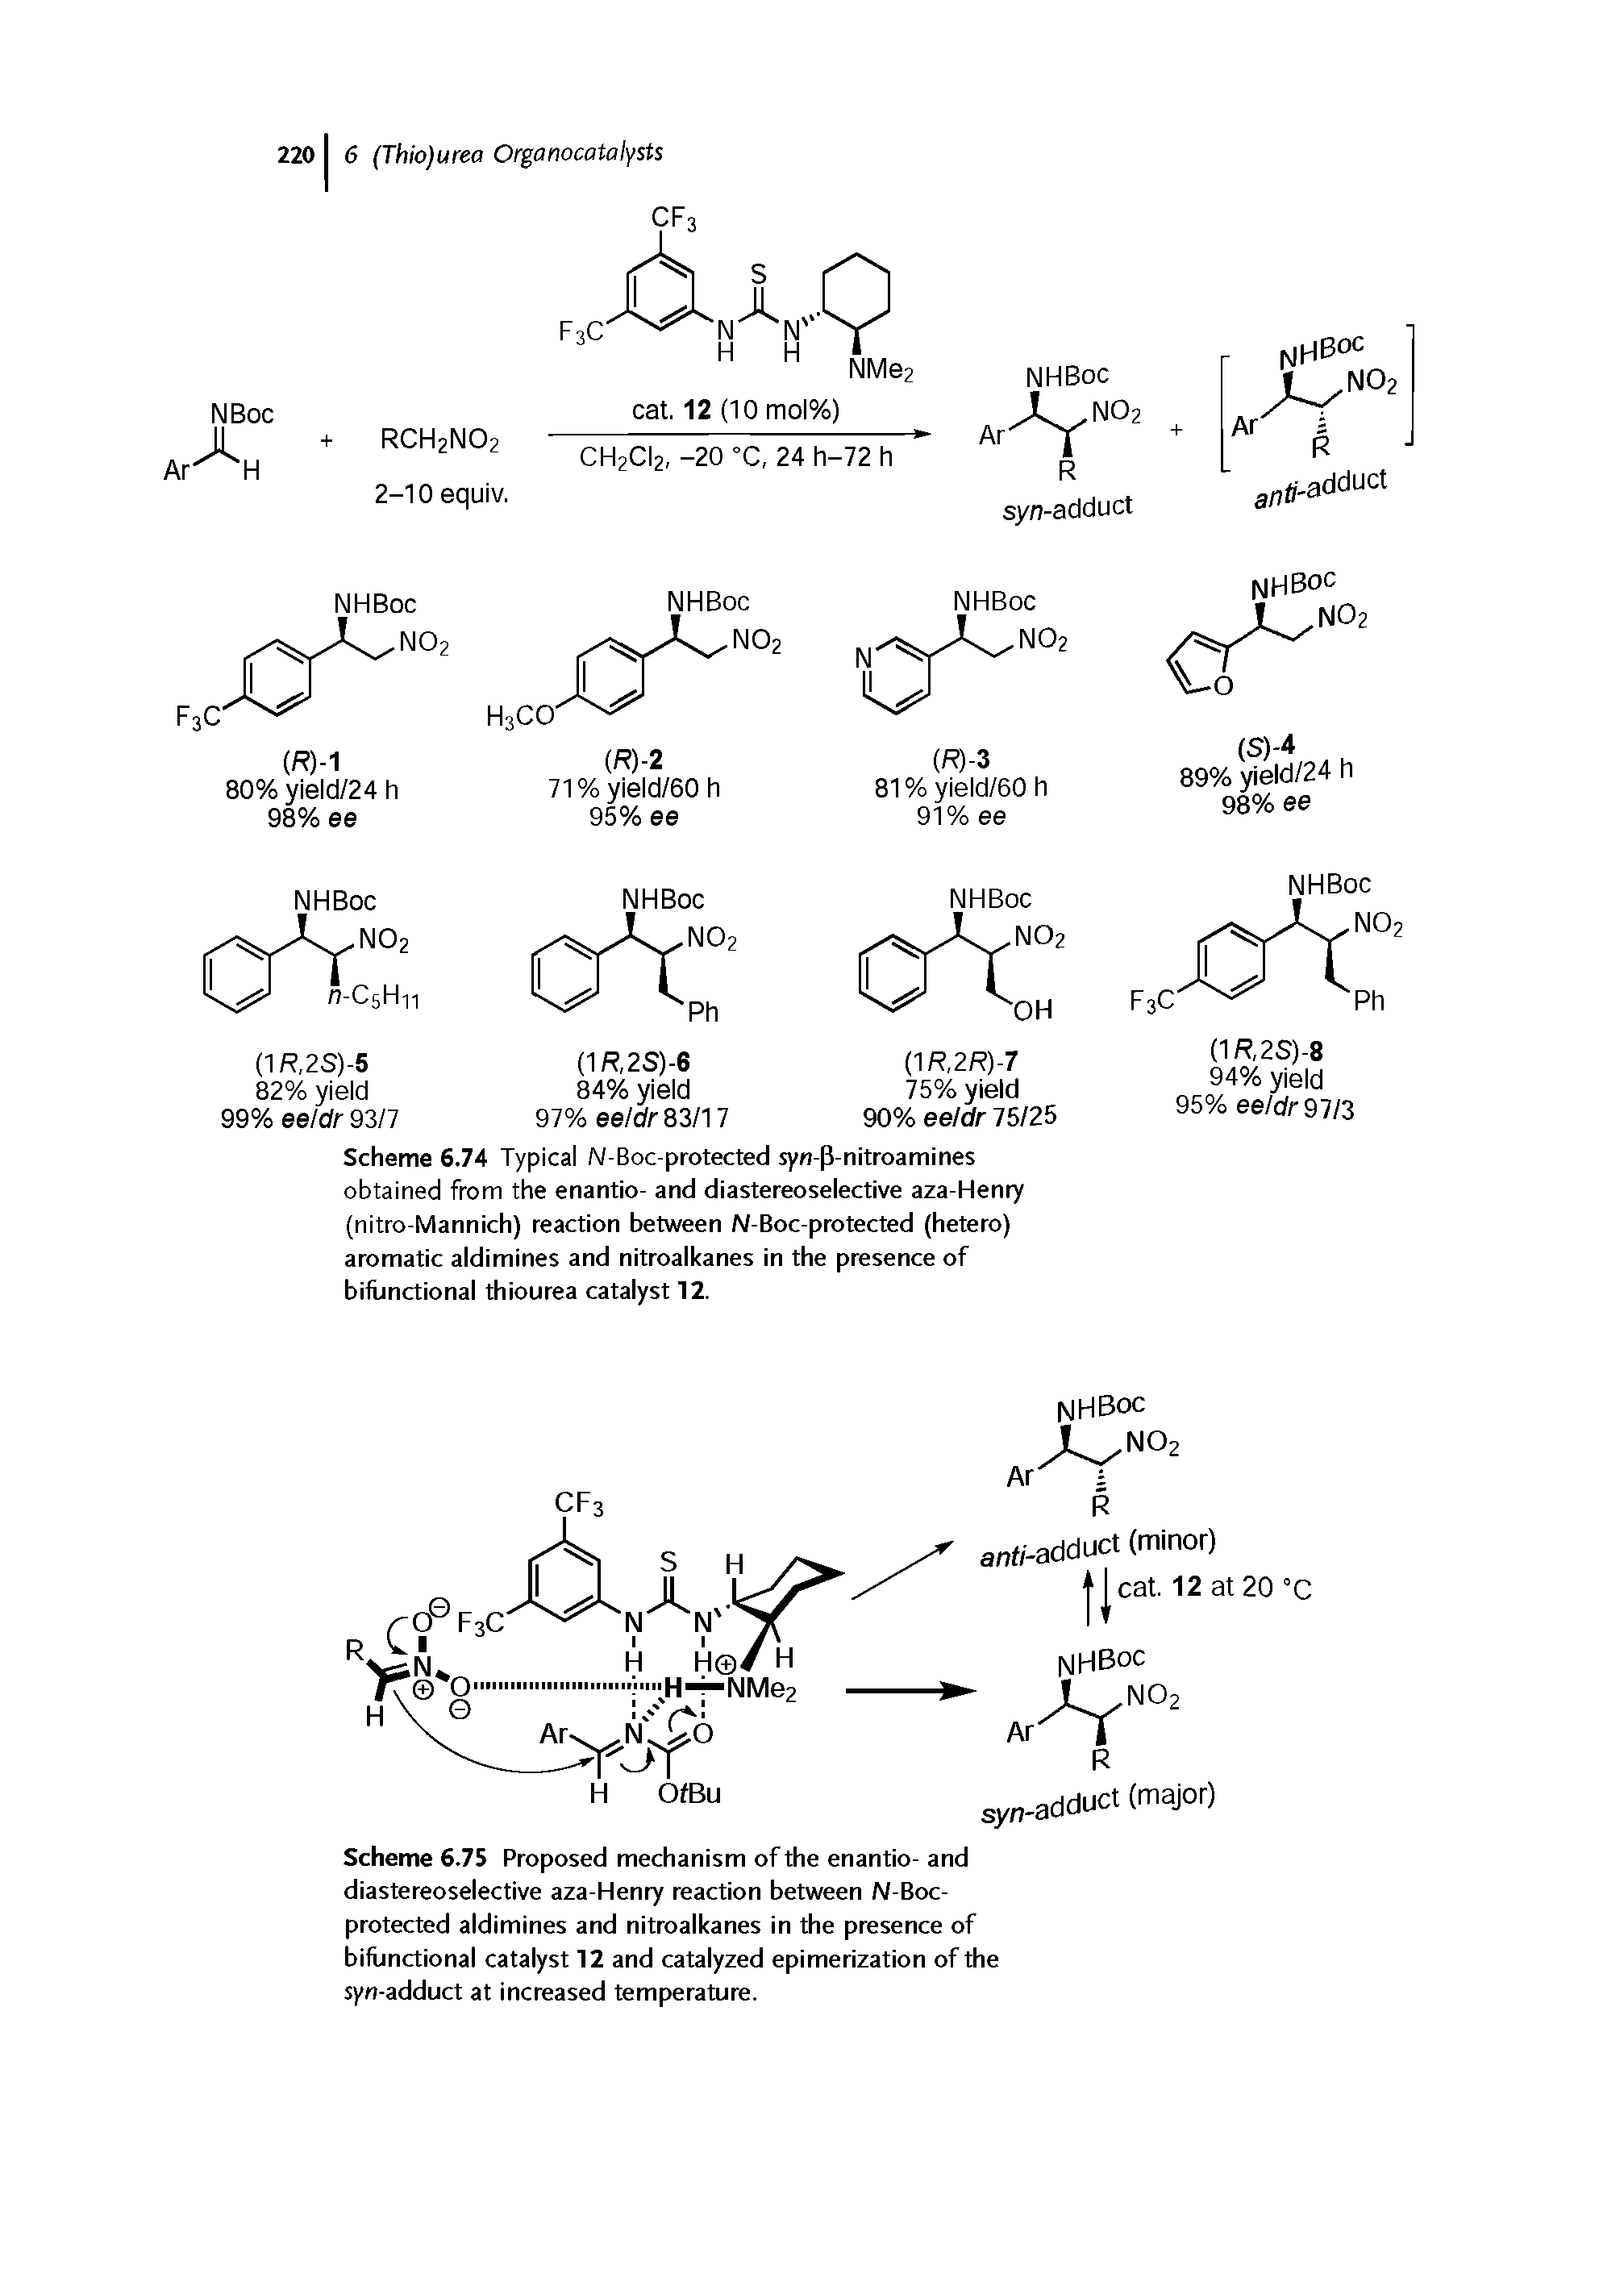 Scheme 6.74 Typical N-Boc-protected syn-P-nitroamines obtained from the enantio- and diastereoselective aza-Henry (nitro-Mannich) reaction between N-Boc-protected (hetero) aromatic aldimines and nitroalkanes in the presence of biflinctional thiourea catalyst 12.